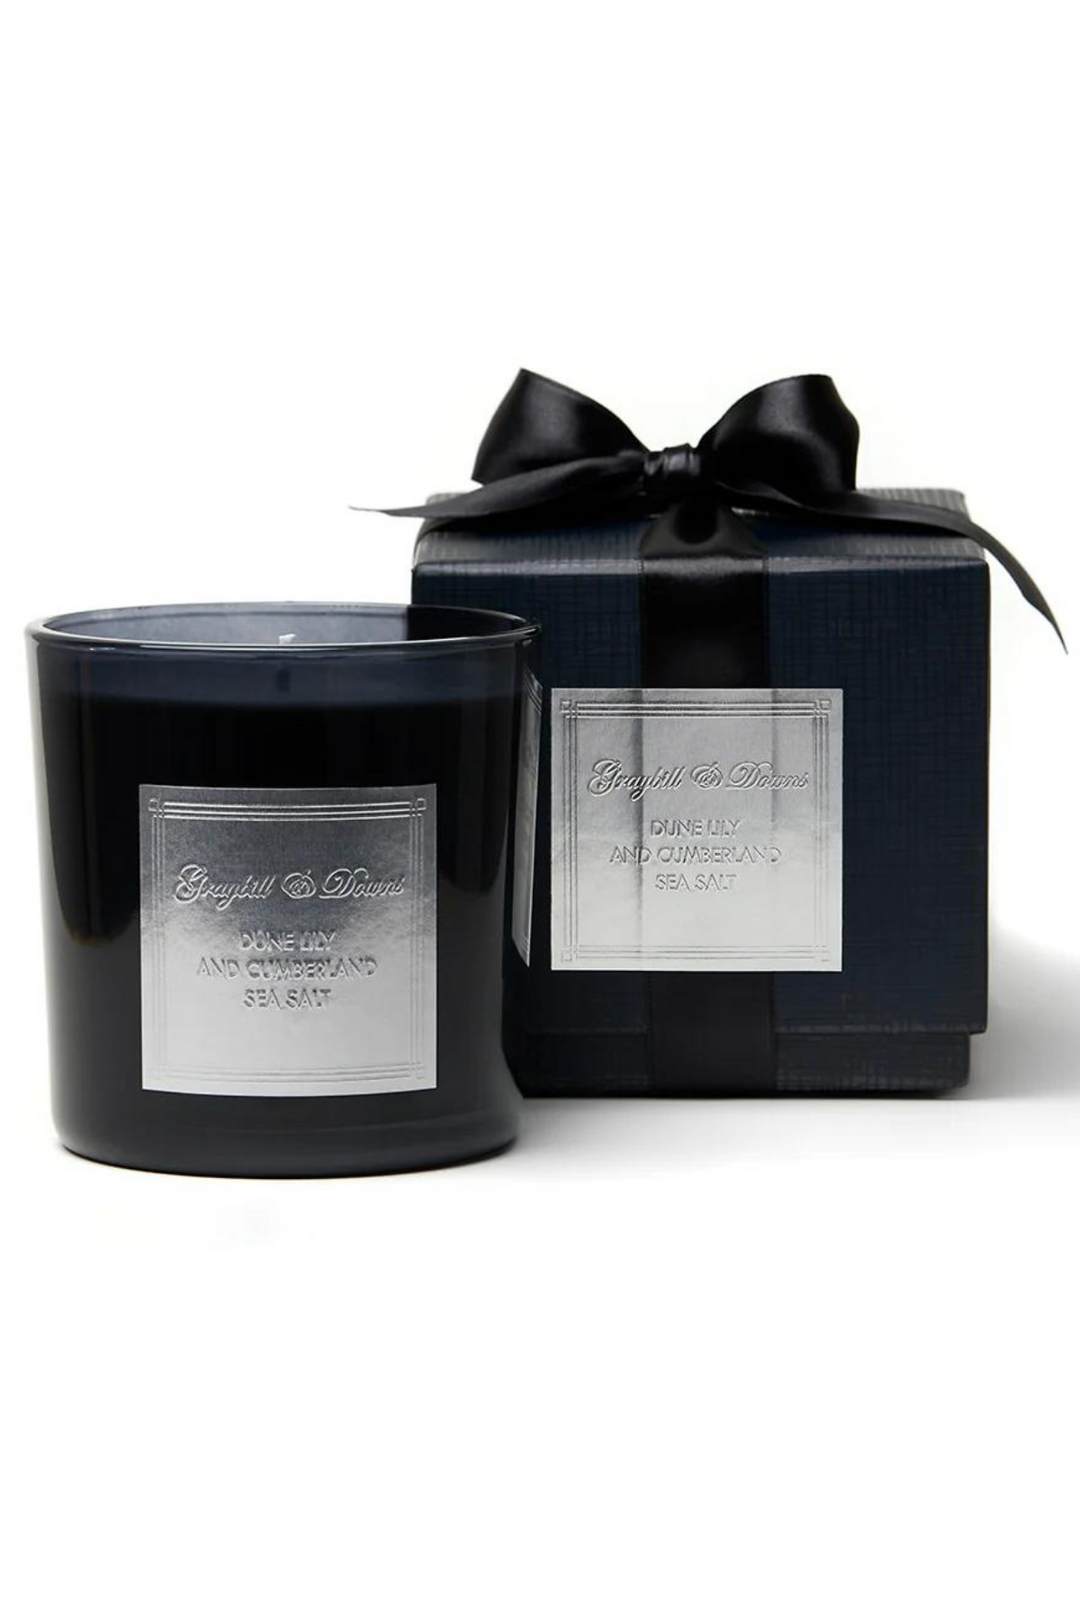 GRAYBILL & DOWNS: DUNE LILY AND CUMBERLAND SEA SALT 1932 CANDLE